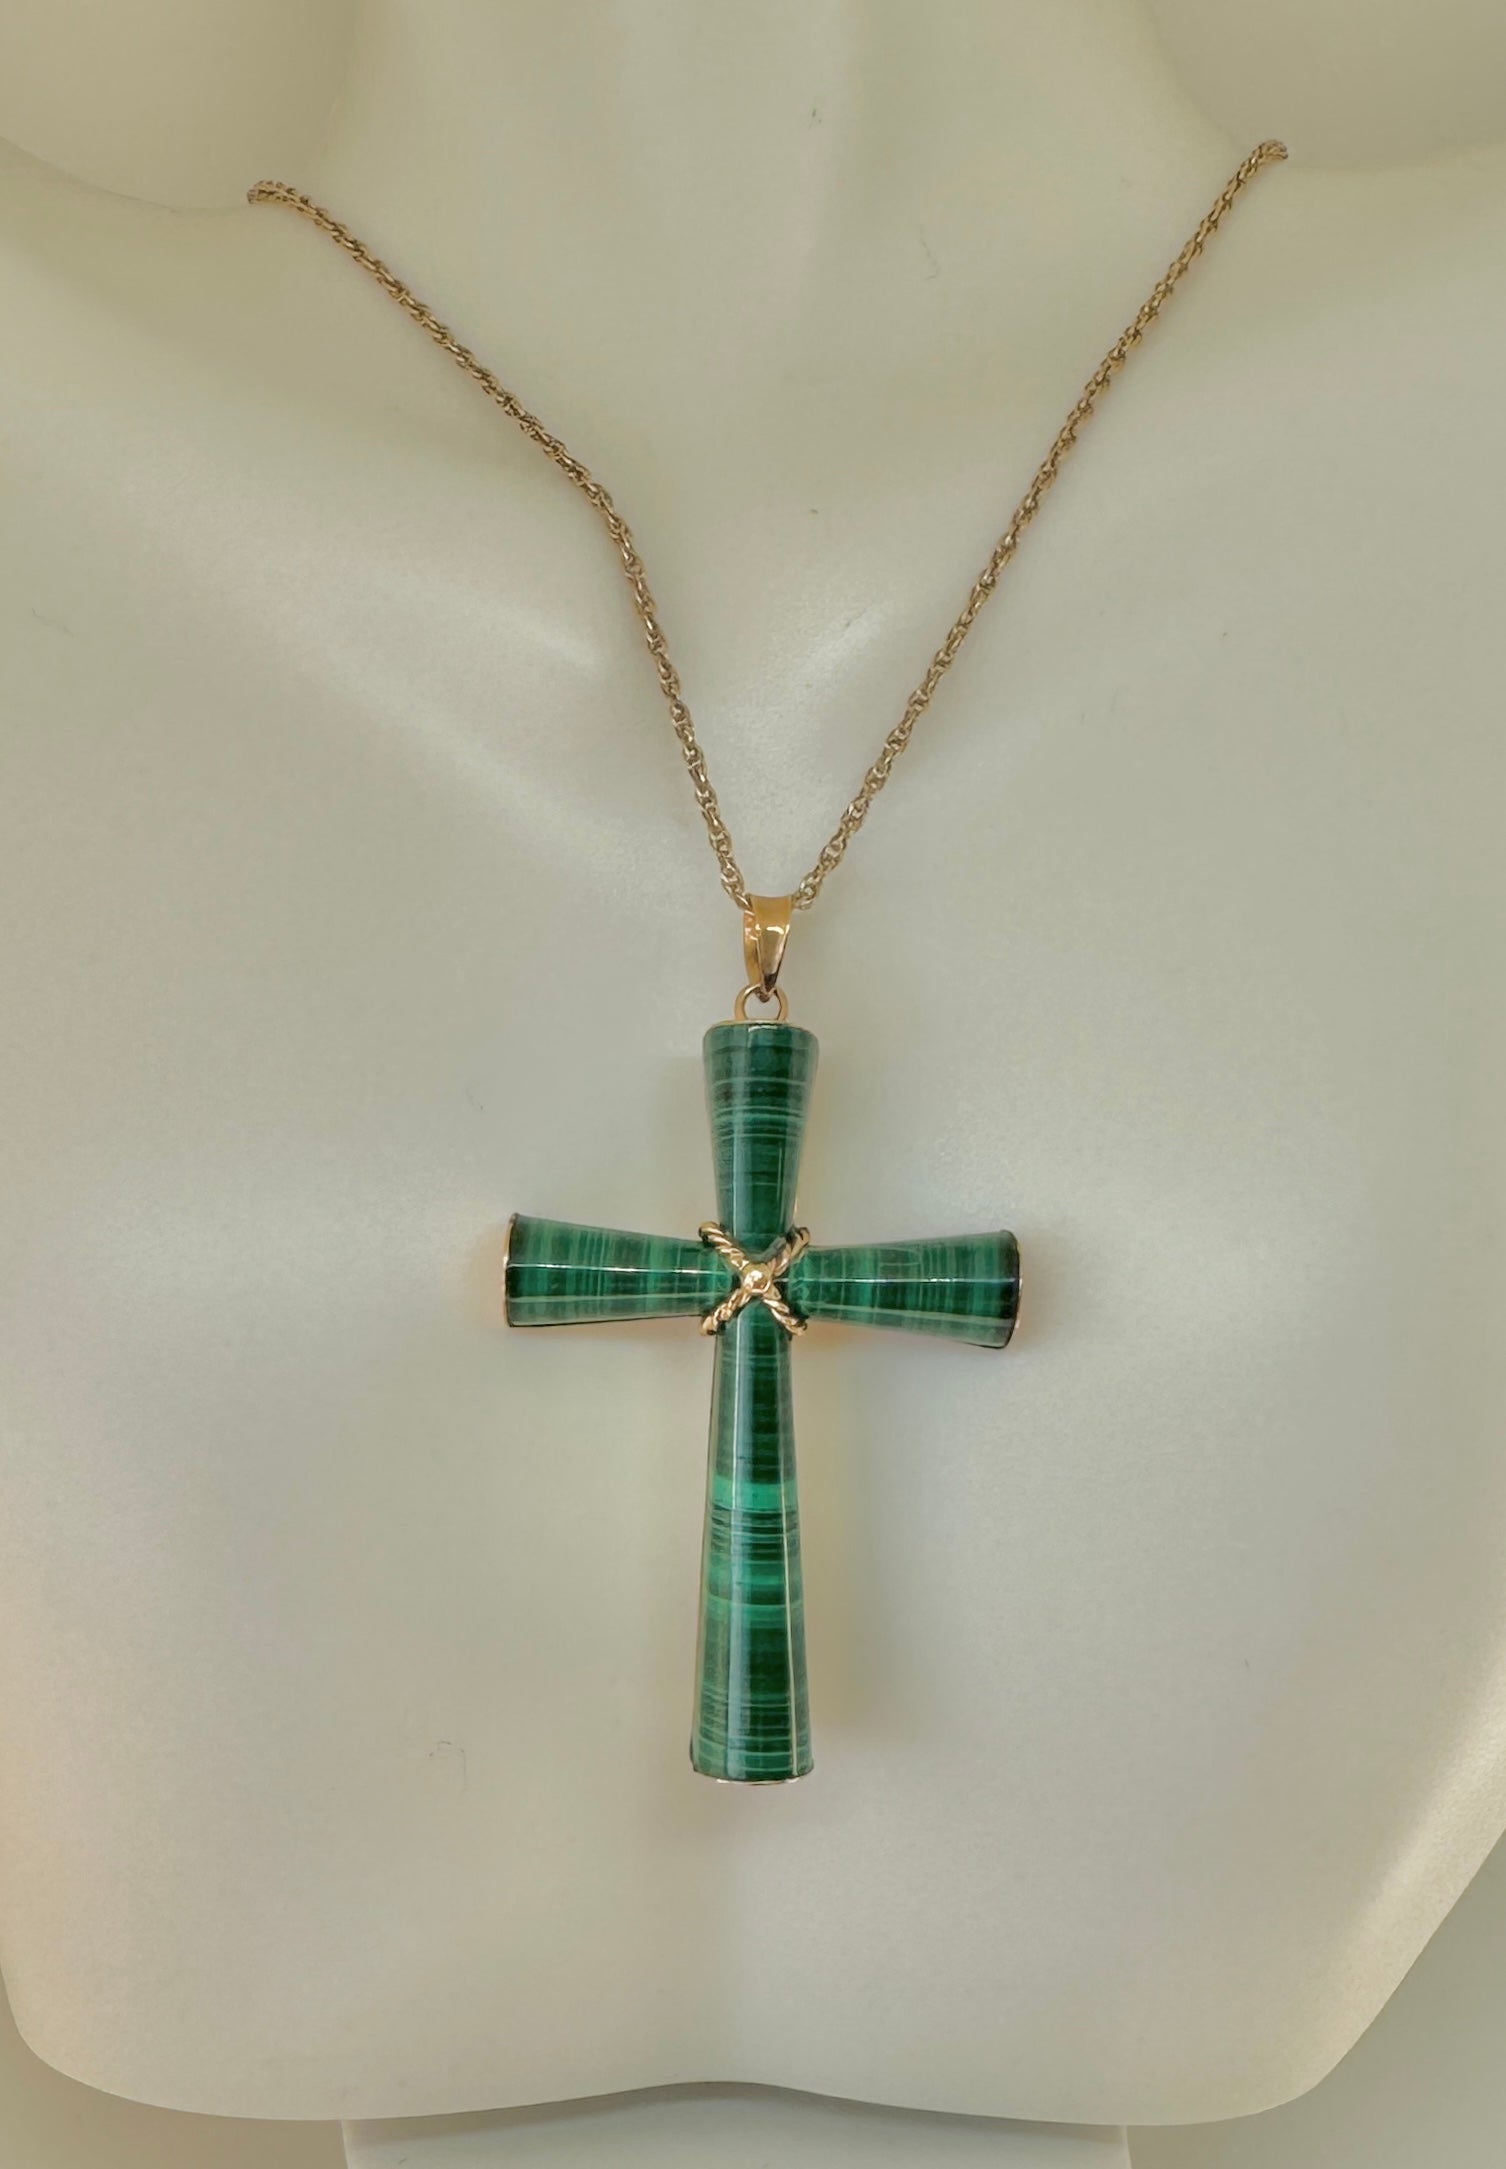 This is an absolutely exquisite Malachite Cross Pendant in 14 Karat Yellow Gold from the estate of Hollywood Legend Mary Lou Daves.  Ms. Daves' jewelry exemplified her exquisite taste.  Her jewels were unique, dramatic and elegant.  The dramatic